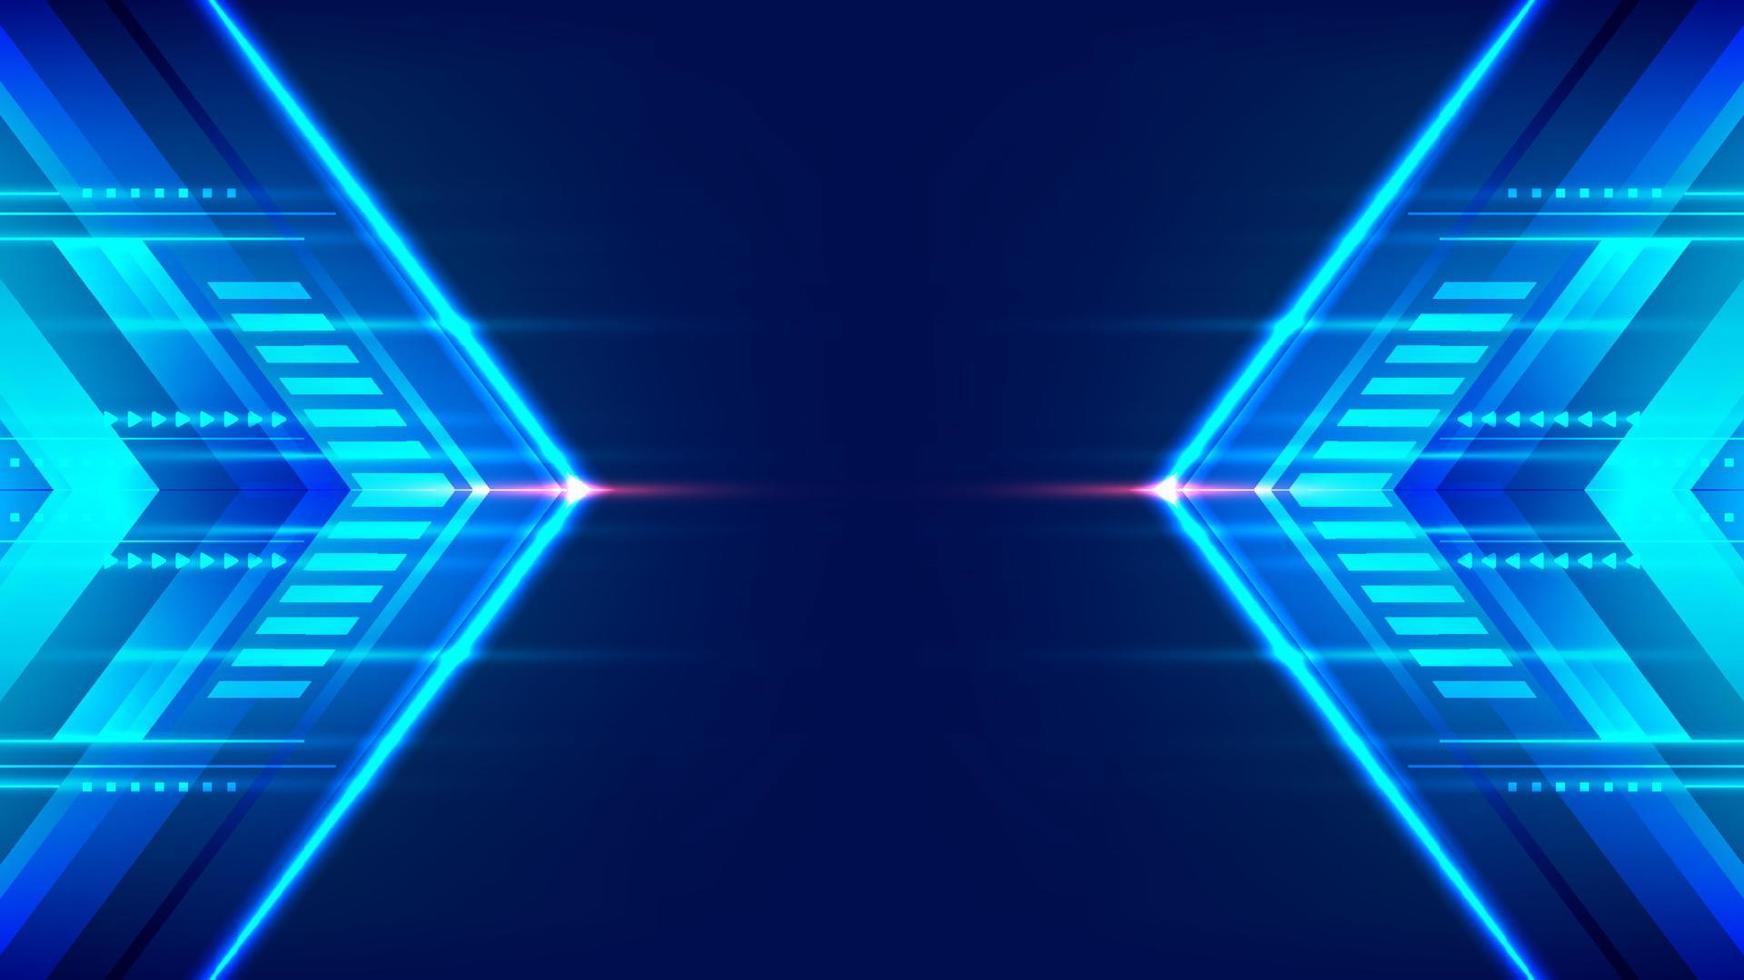 Abstract modern technology futuristic concept high speed movement blue arrows geometric stripe lines with lighting effect on dark background vector